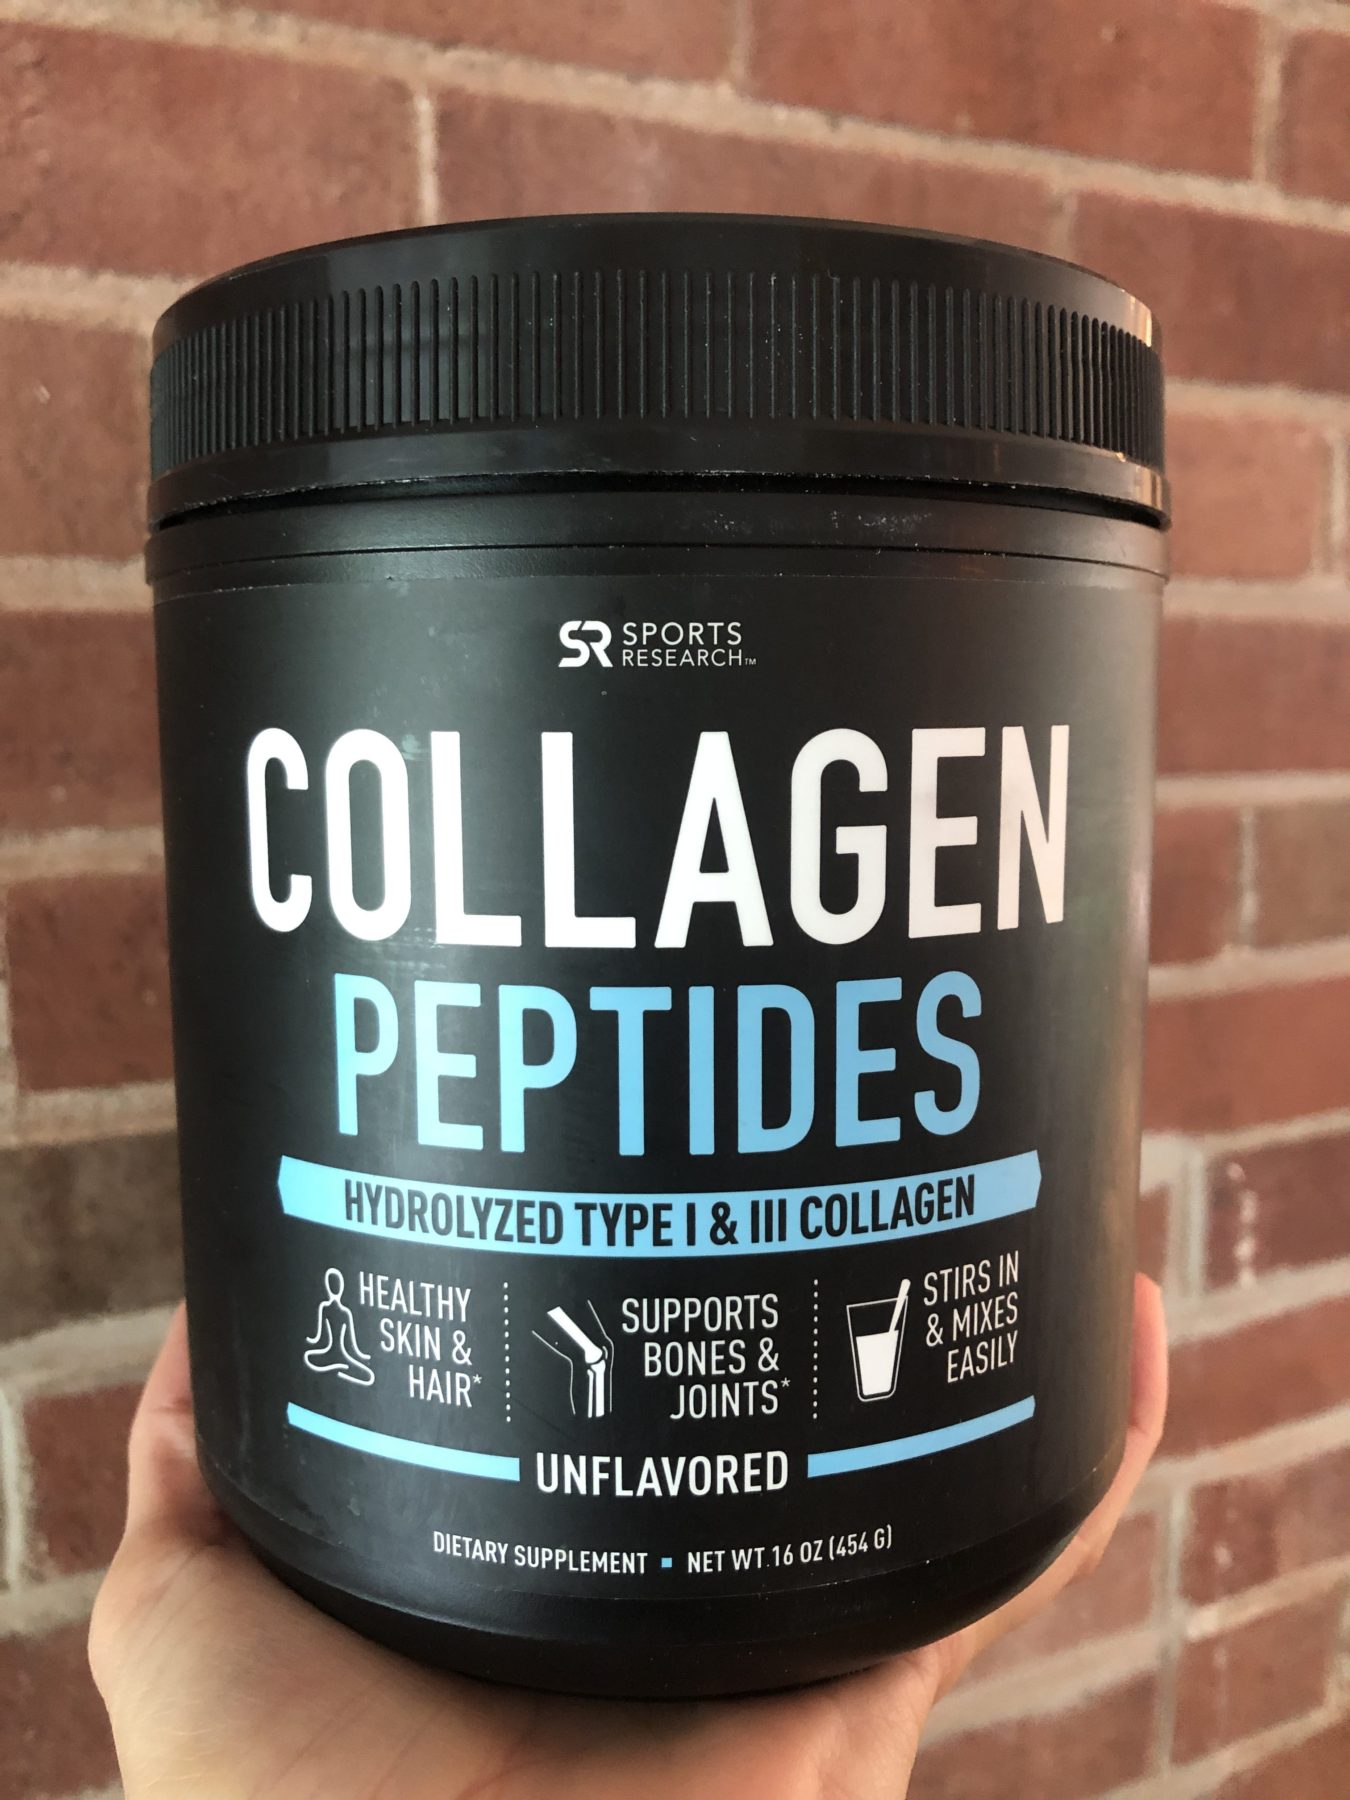 Mcdaniel S Bite Sized Reviews Sports Research Collagen Peptides Mcdaniel Nutrition